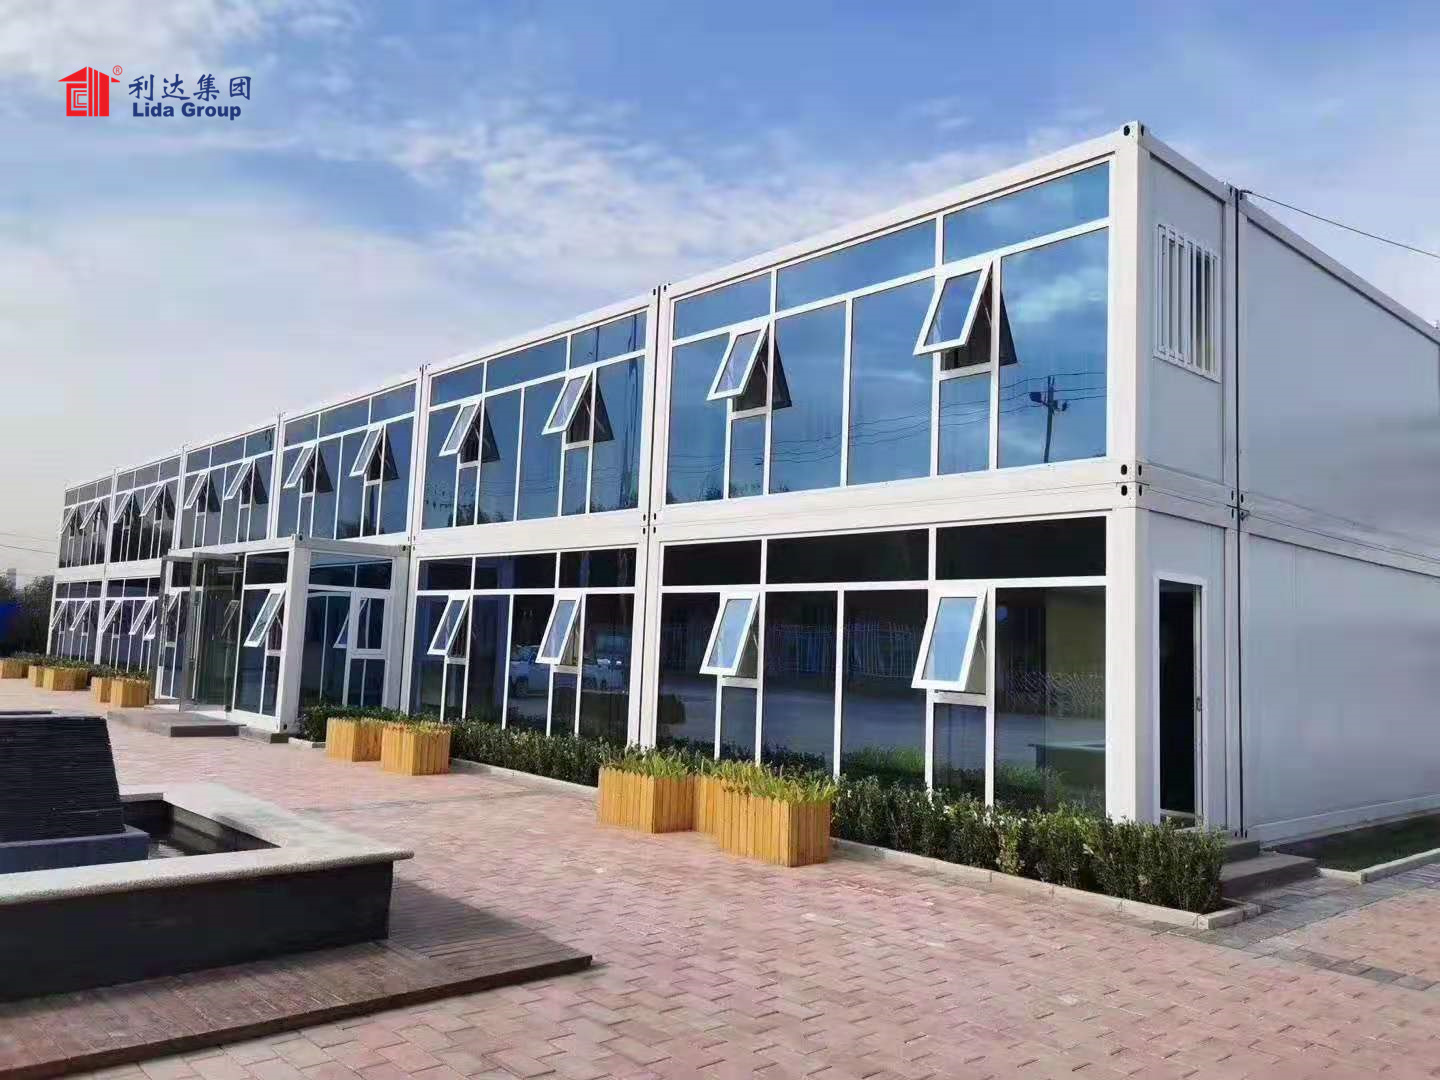 20FT 40ft Easily Assemble Temporary Prefabricated Modular Steel Flat Pack Container Prefab House -Lida Group